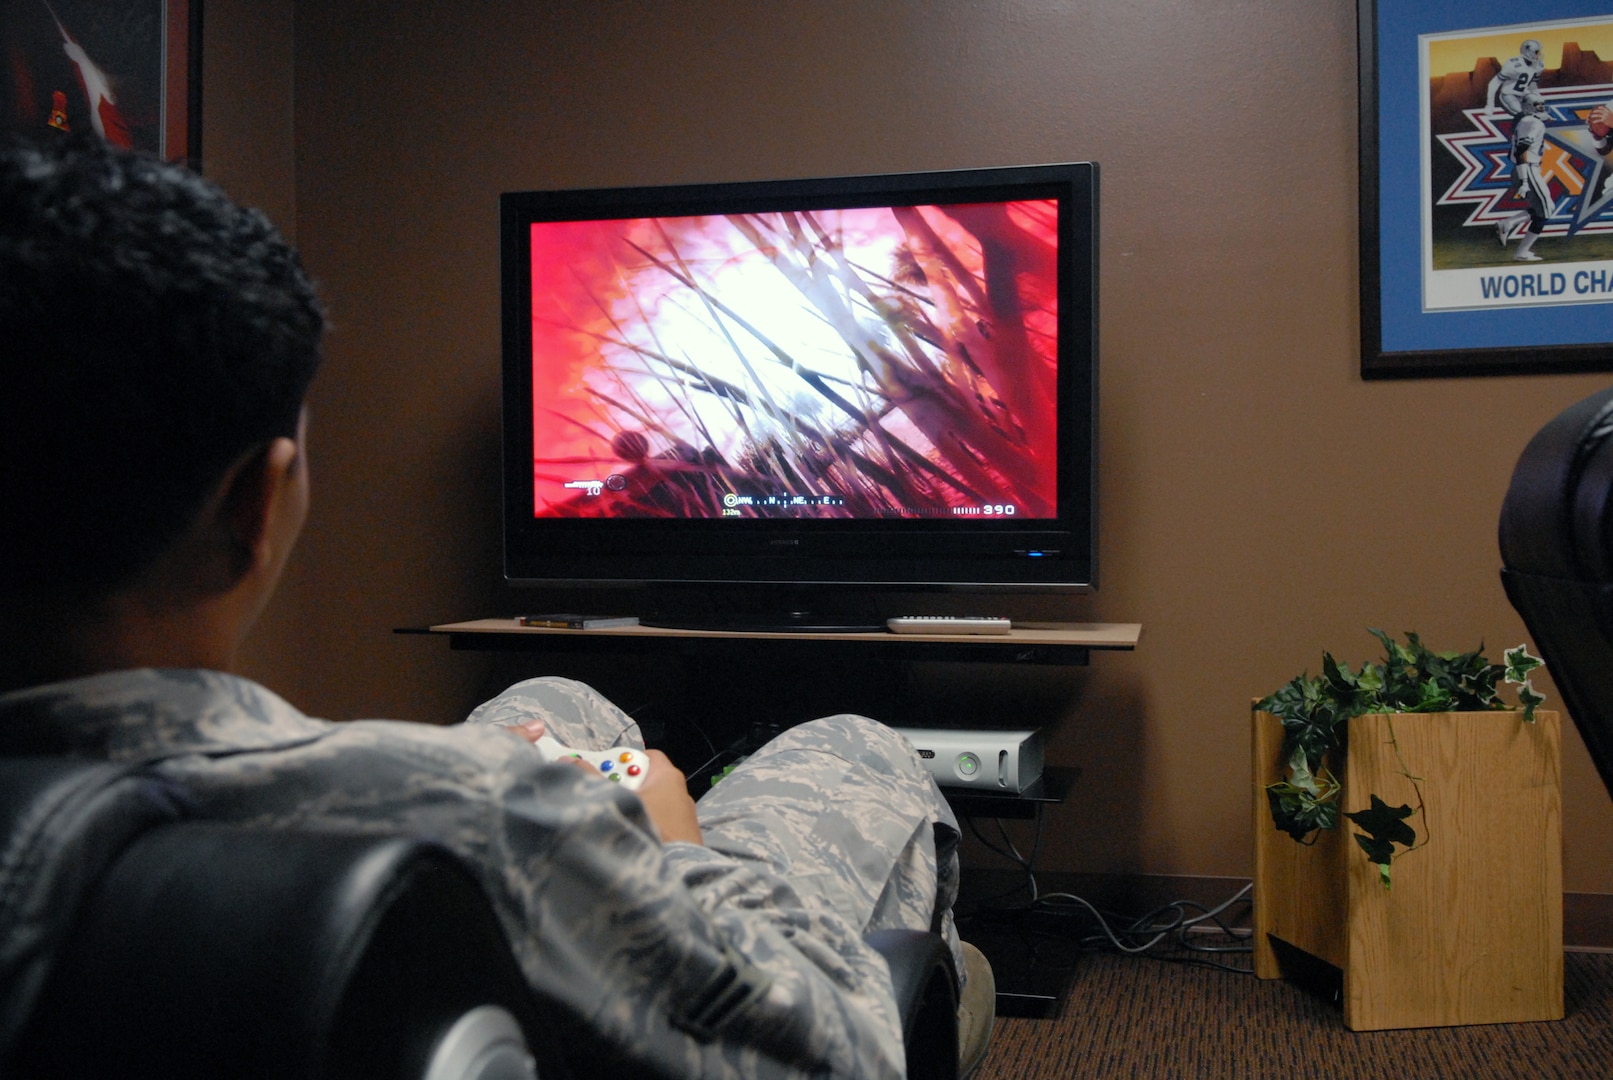 With up-to-date renovations to the Airmen dormitories, residents can now enjoy leisurely activities like video games, high-definition television and movies and wireless internet in their dayroom.